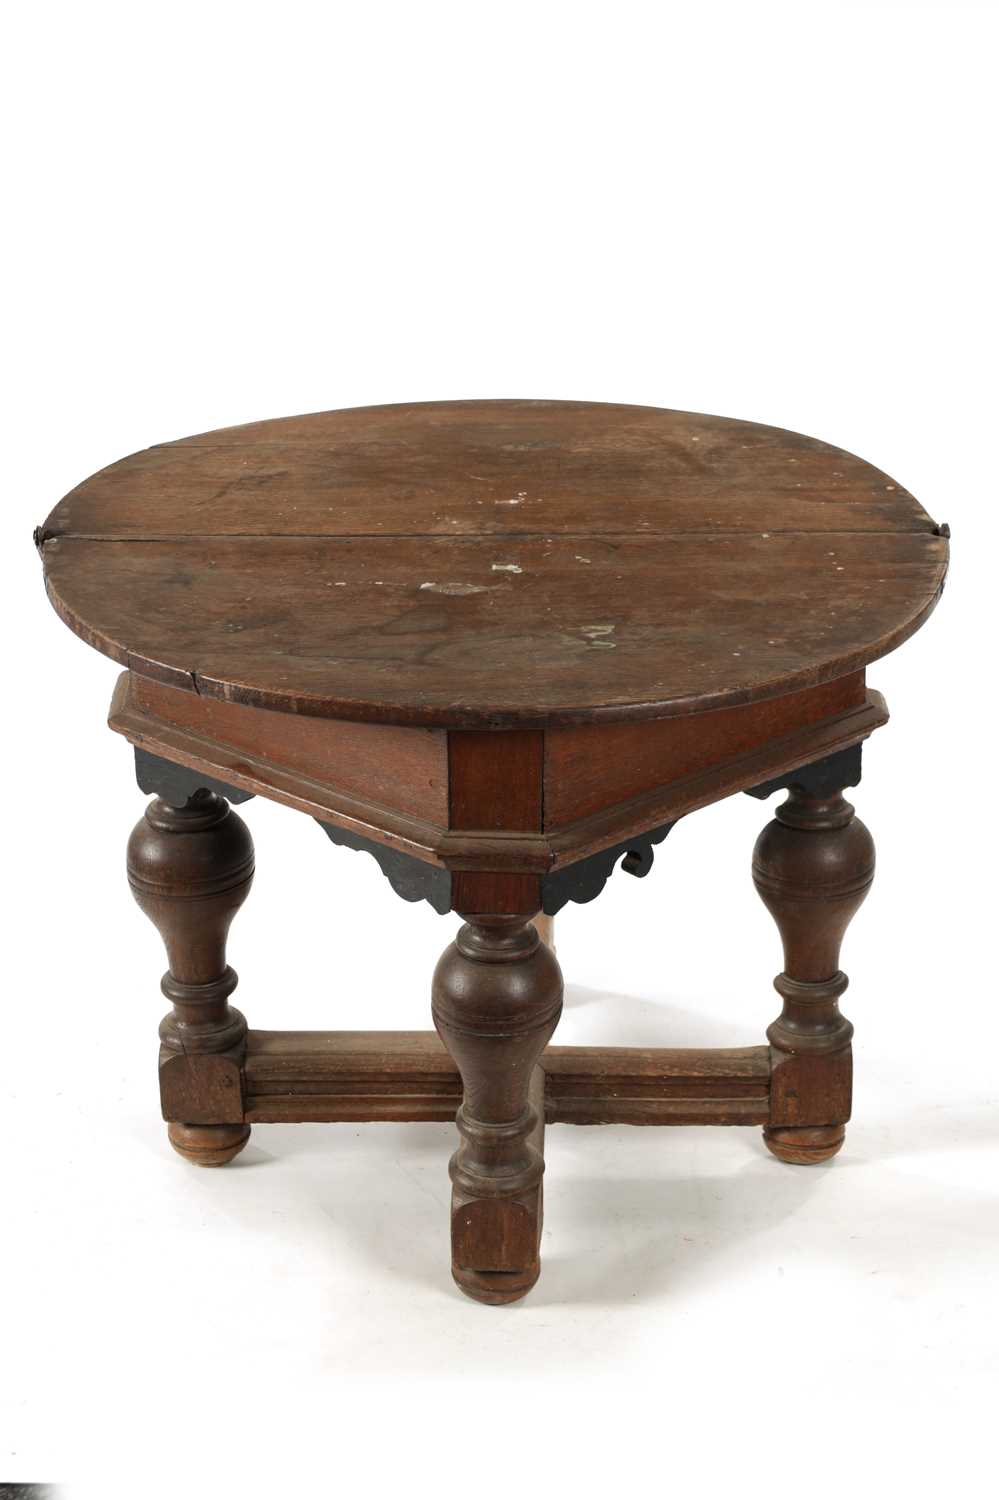 A LATE 17TH CENTURY OAK CREDENCE TABLE - Image 2 of 3